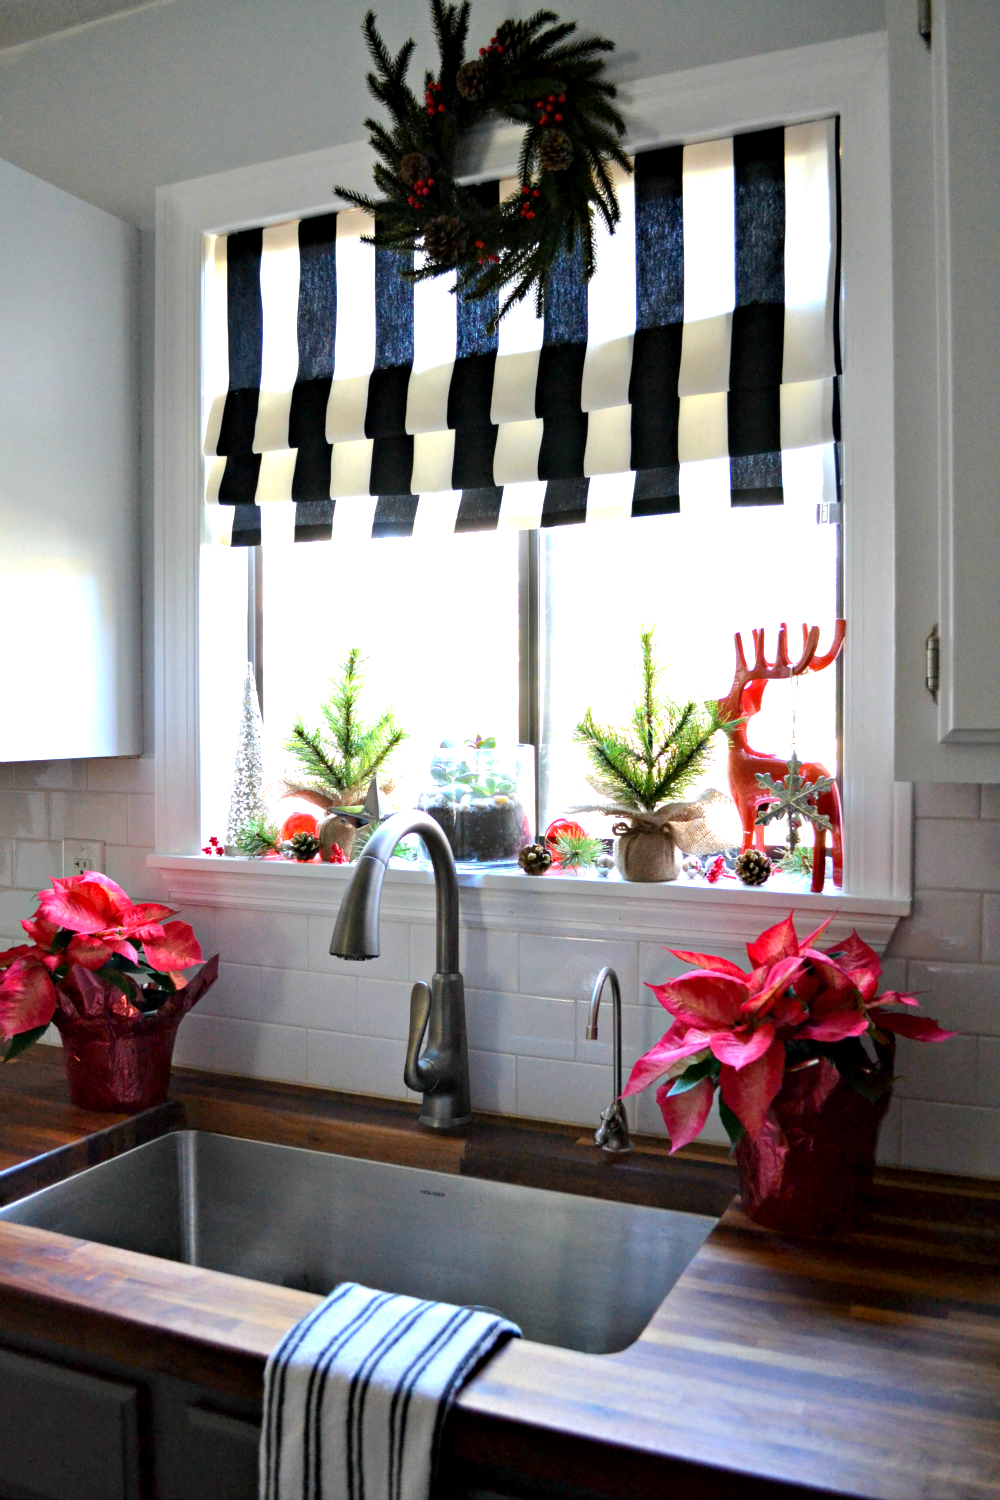 Timeless Elegance: Black and White Kitchen Curtains for a Classic Look